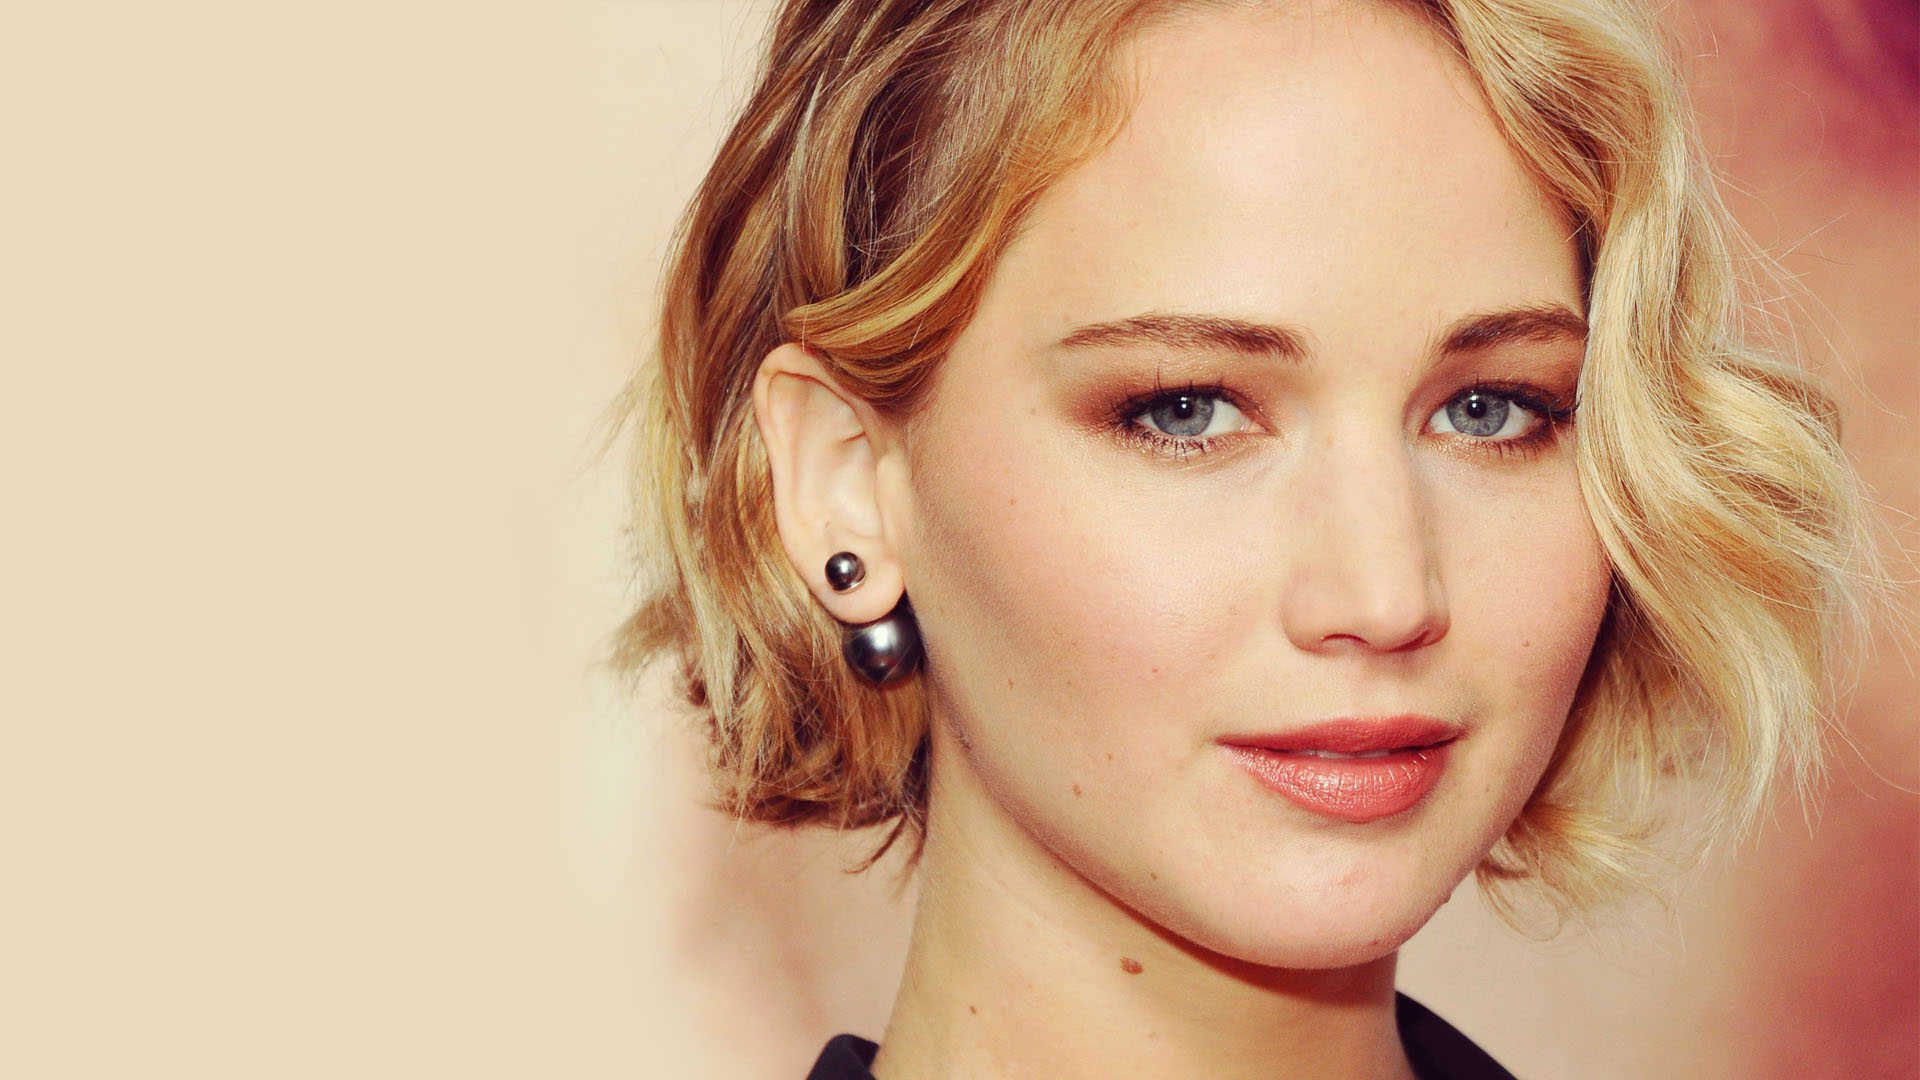 Jennifer Lawrence HD Wallpapers - This Jennifer Lawrence wallpaper HD is available in 1920x1080 pixels resolution and its file size is 1.63 MB. You can use this wallpaper as background for your desktop Computer, Mac, Android or iPhone etc. - Jennifer Lawrence